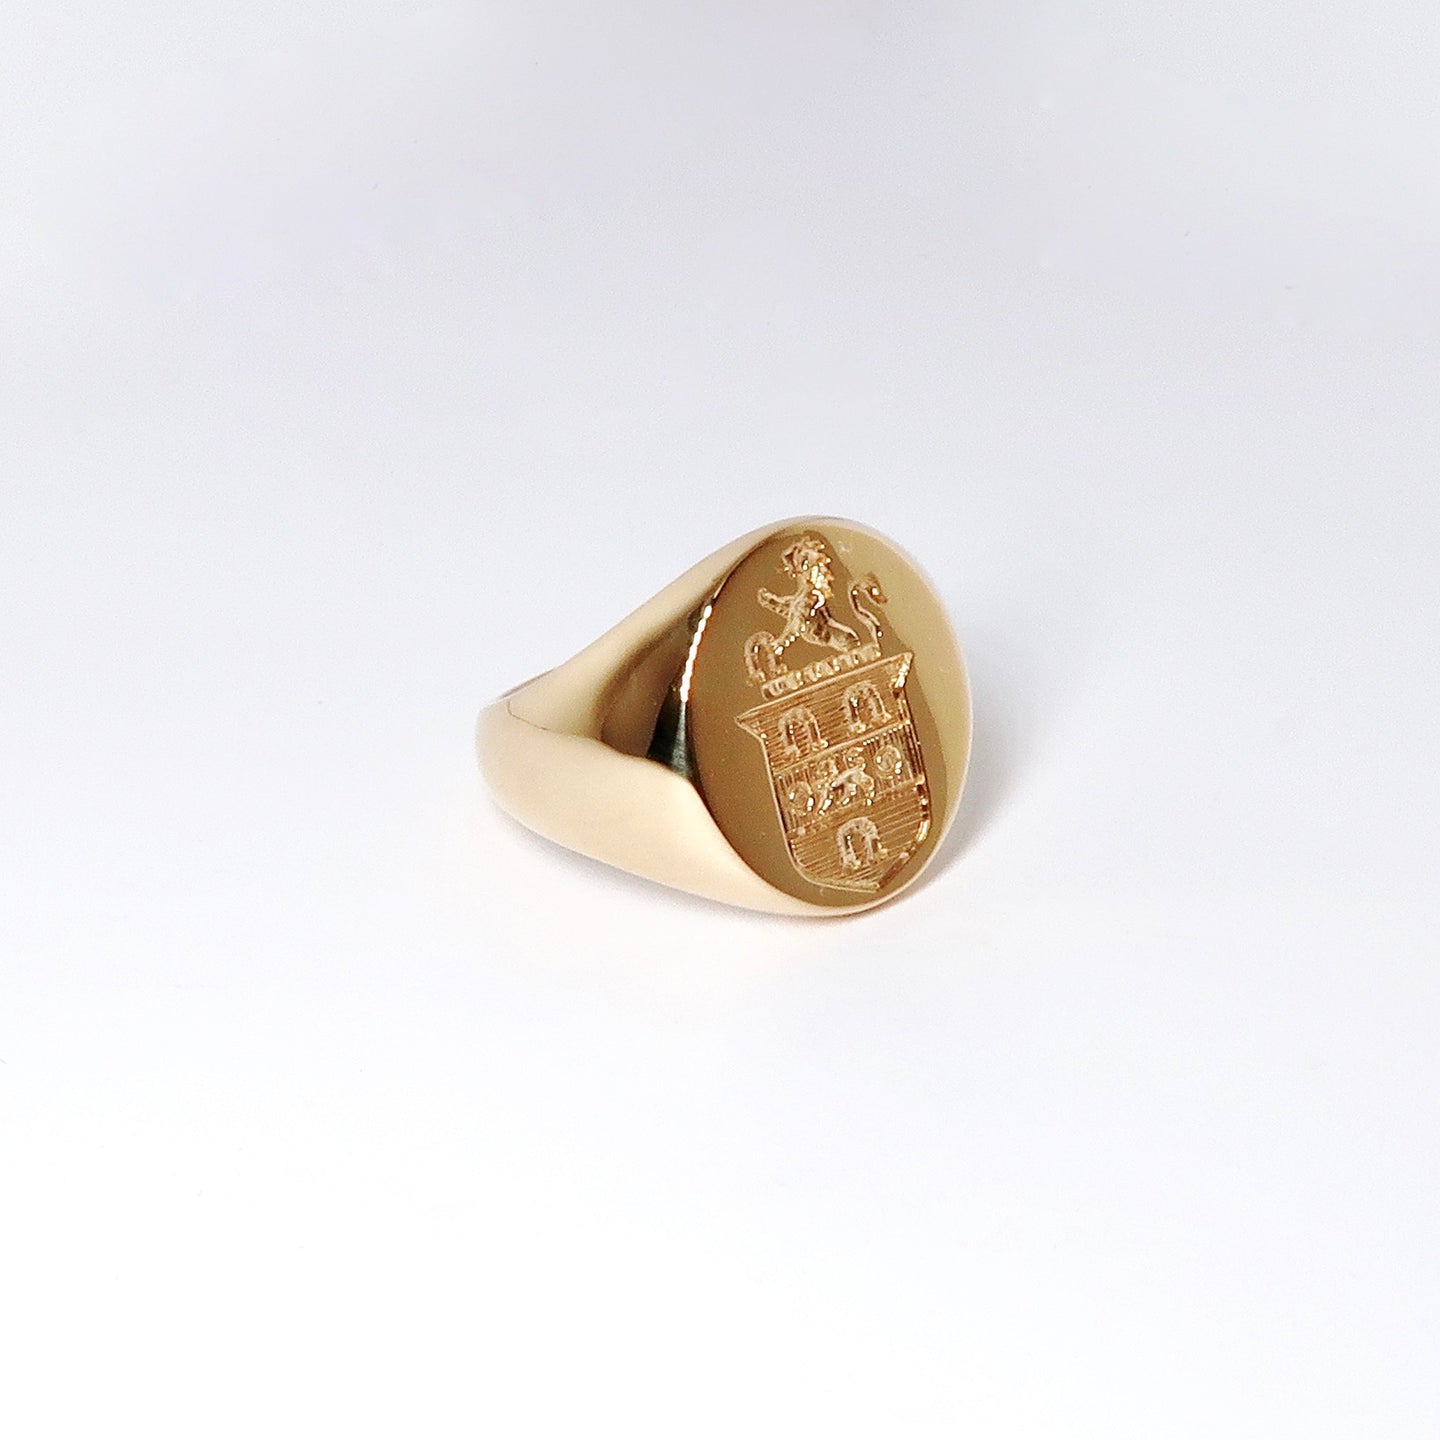 18k Yellow Gold Oval Crest Ring, with Engraved Family Crest